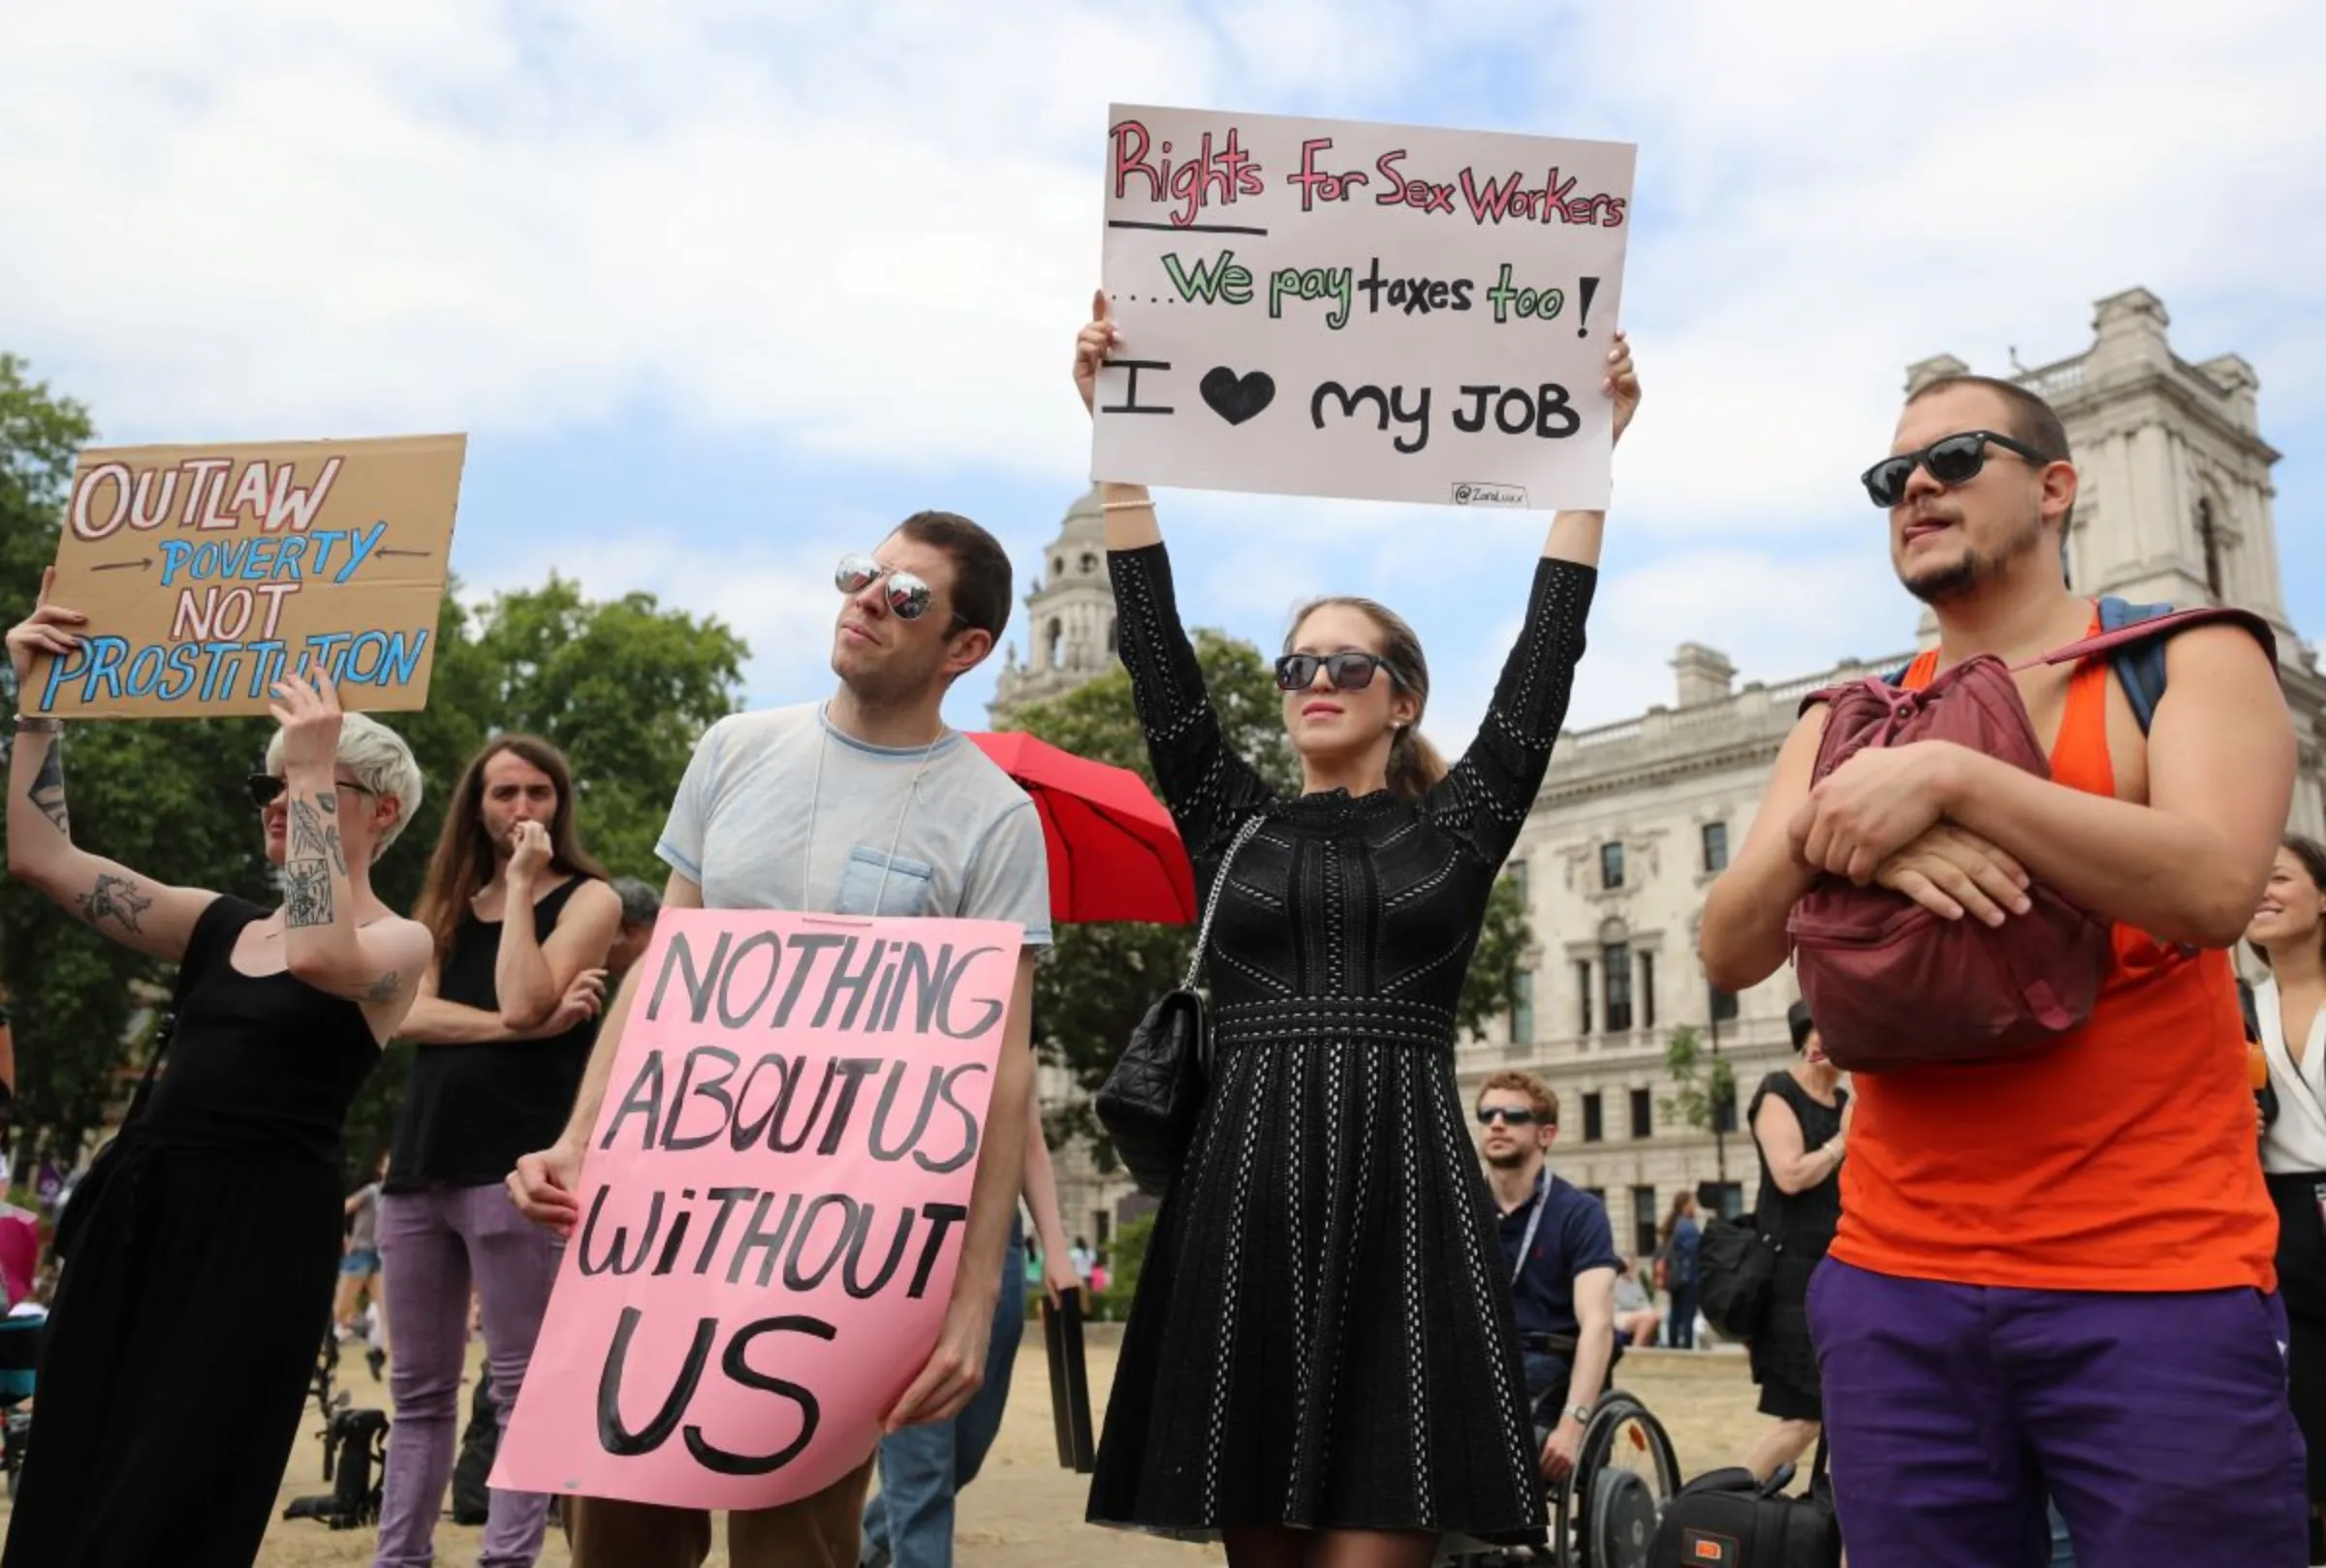 Sex workers demonstrate outside the Houses of Parliament in Westminster, London, Britain, July 4, 2018. REUTERS/Simon Dawson